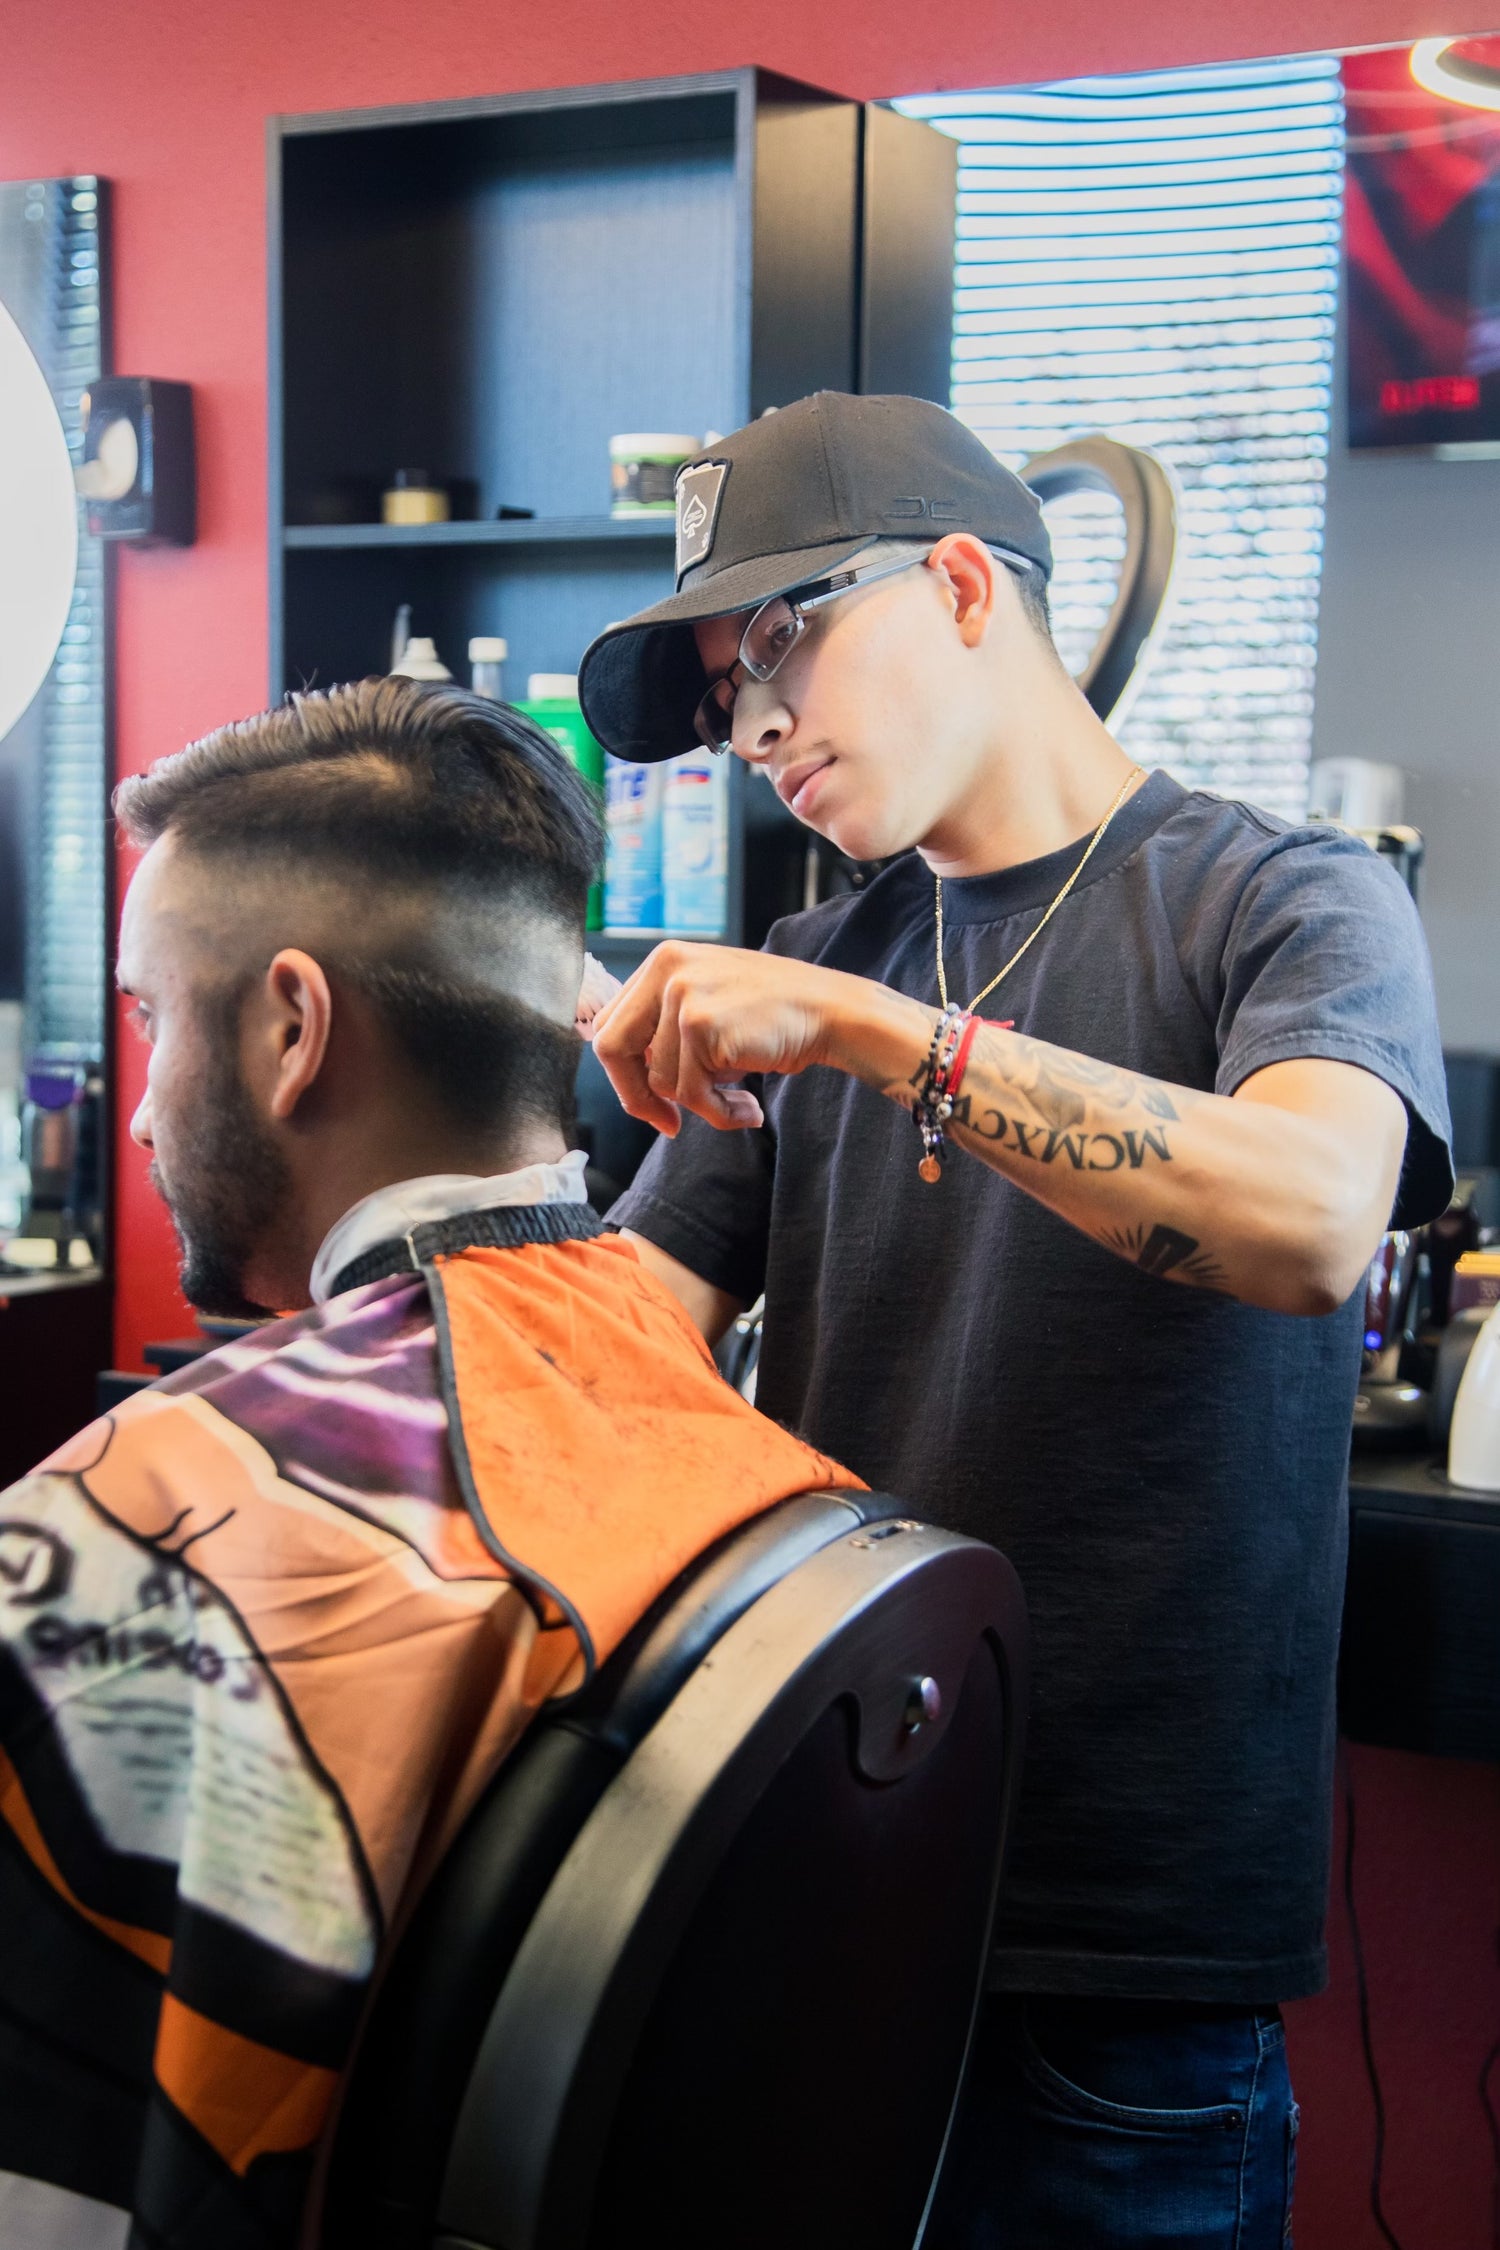 Barber with glasses in a black shirt with a black hat giving a client a haircut